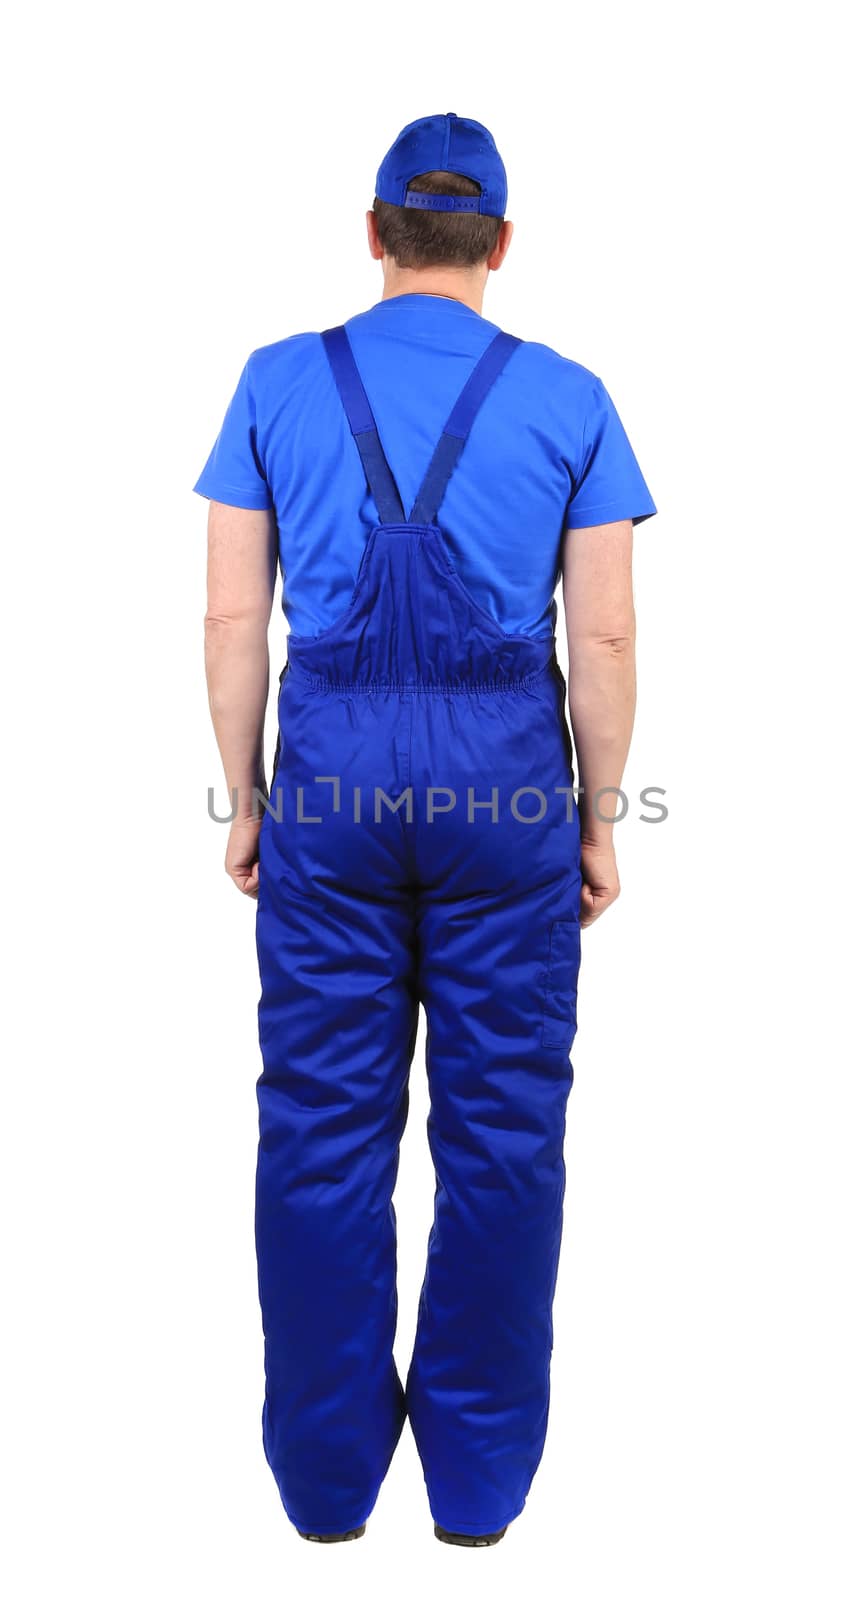 Worker in blue overalls. Back view. Isolated on a white background.